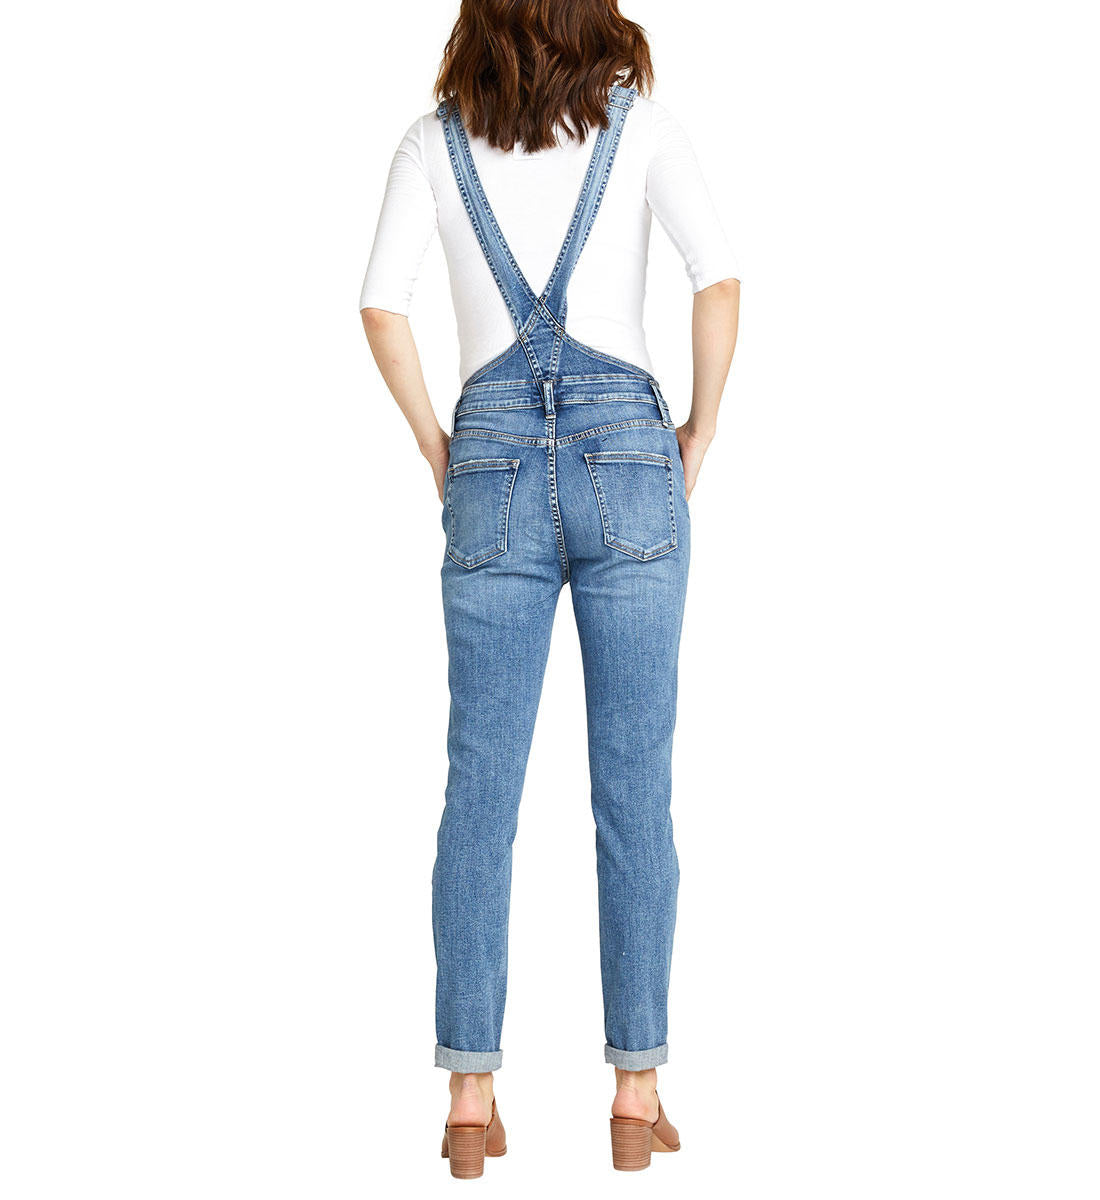 SILVER JEANS Overall